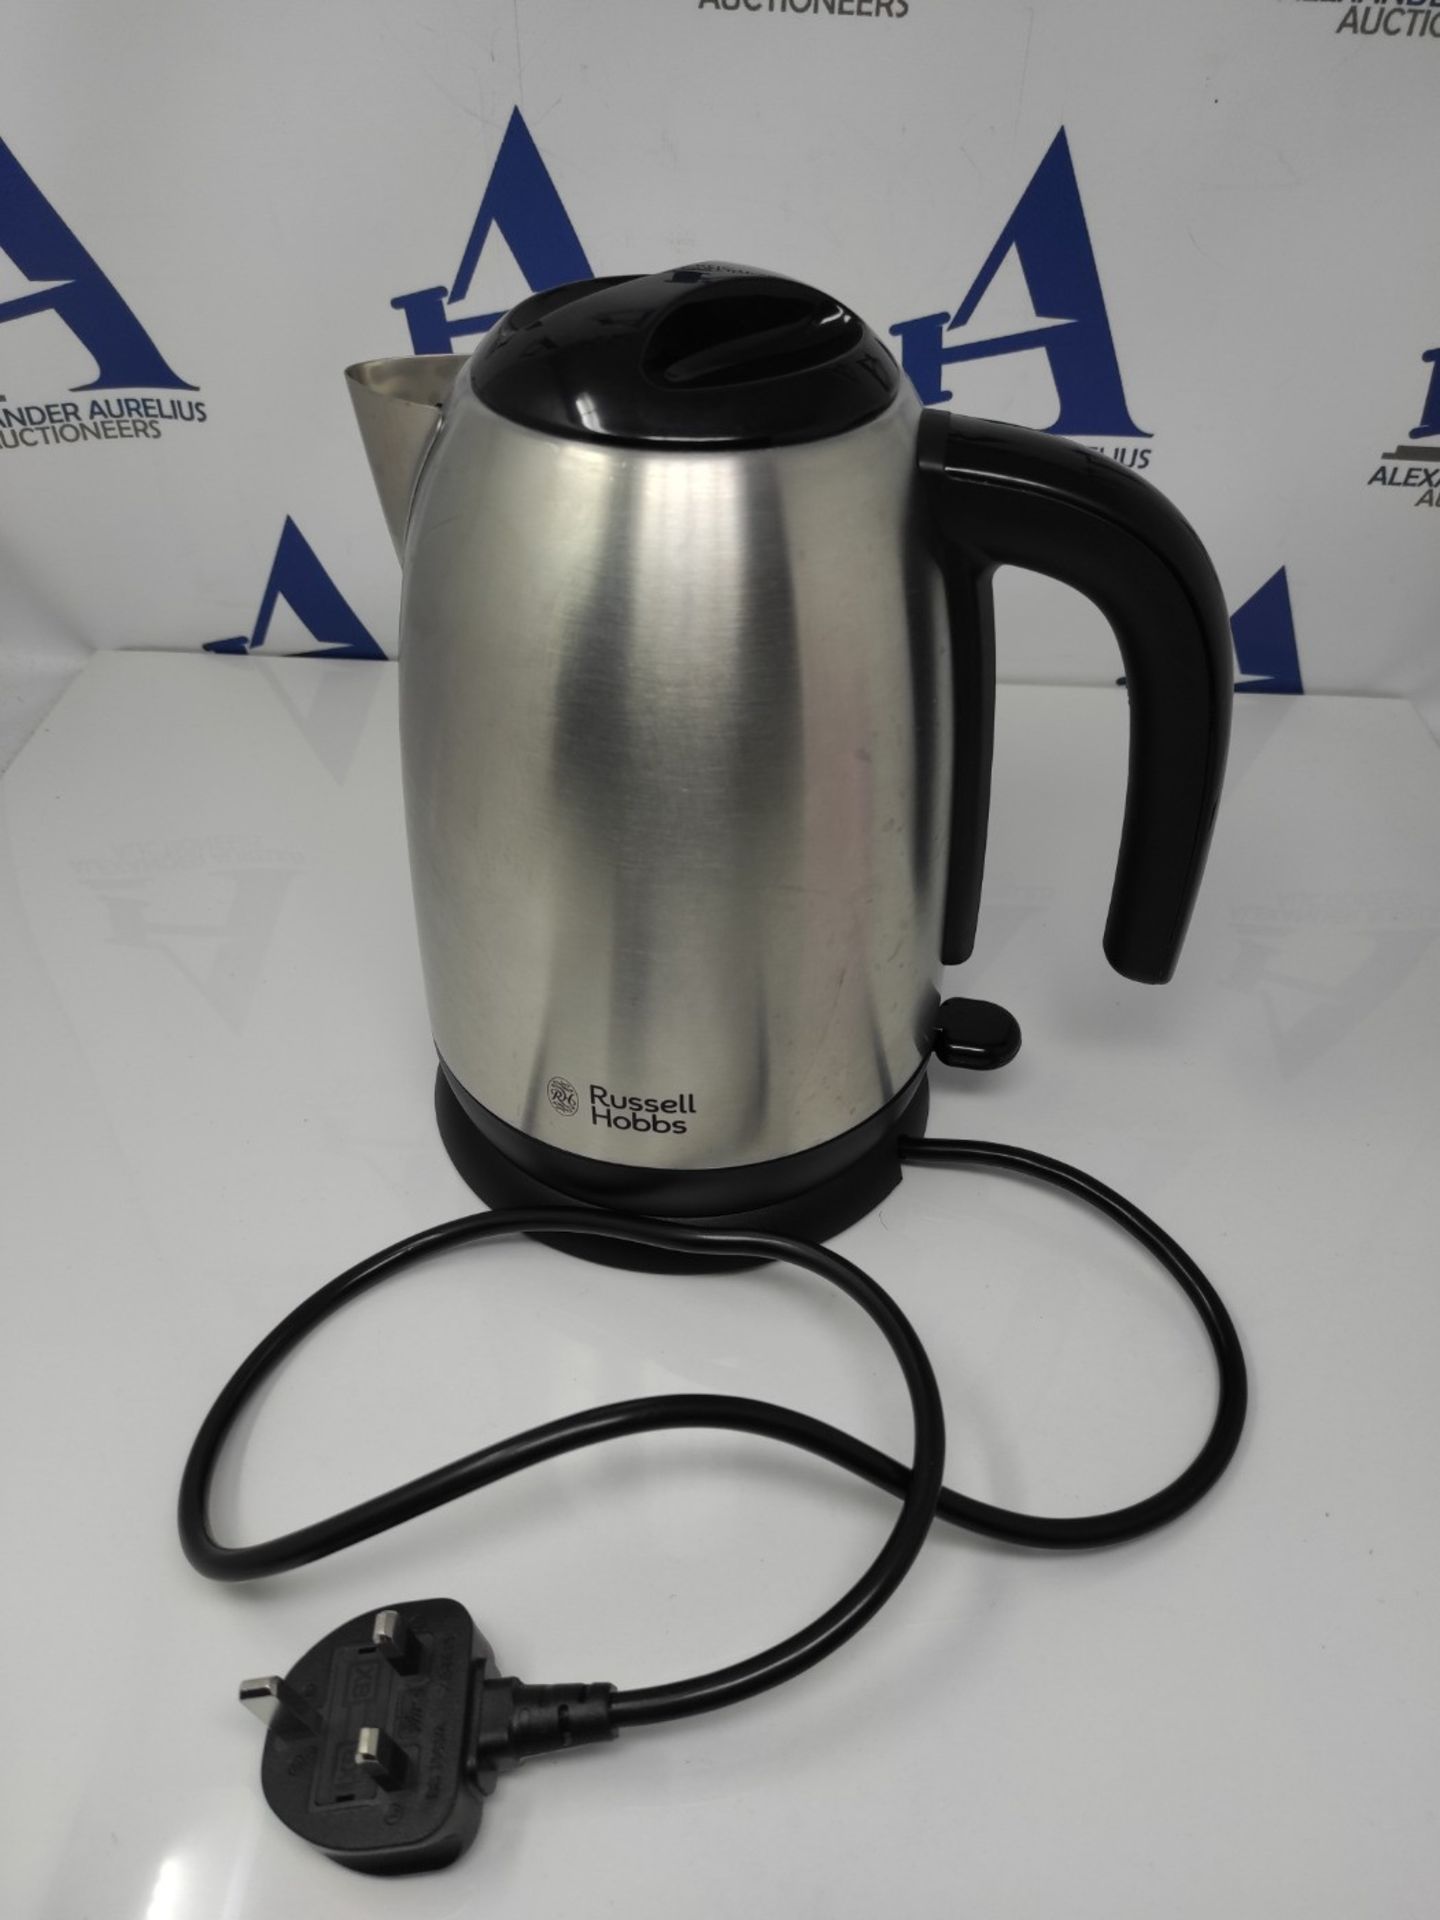 Russell Hobbs 23910 Adventure Brushed Stainless Steel Electric Kettle, Open Handle, 30 - Image 2 of 3